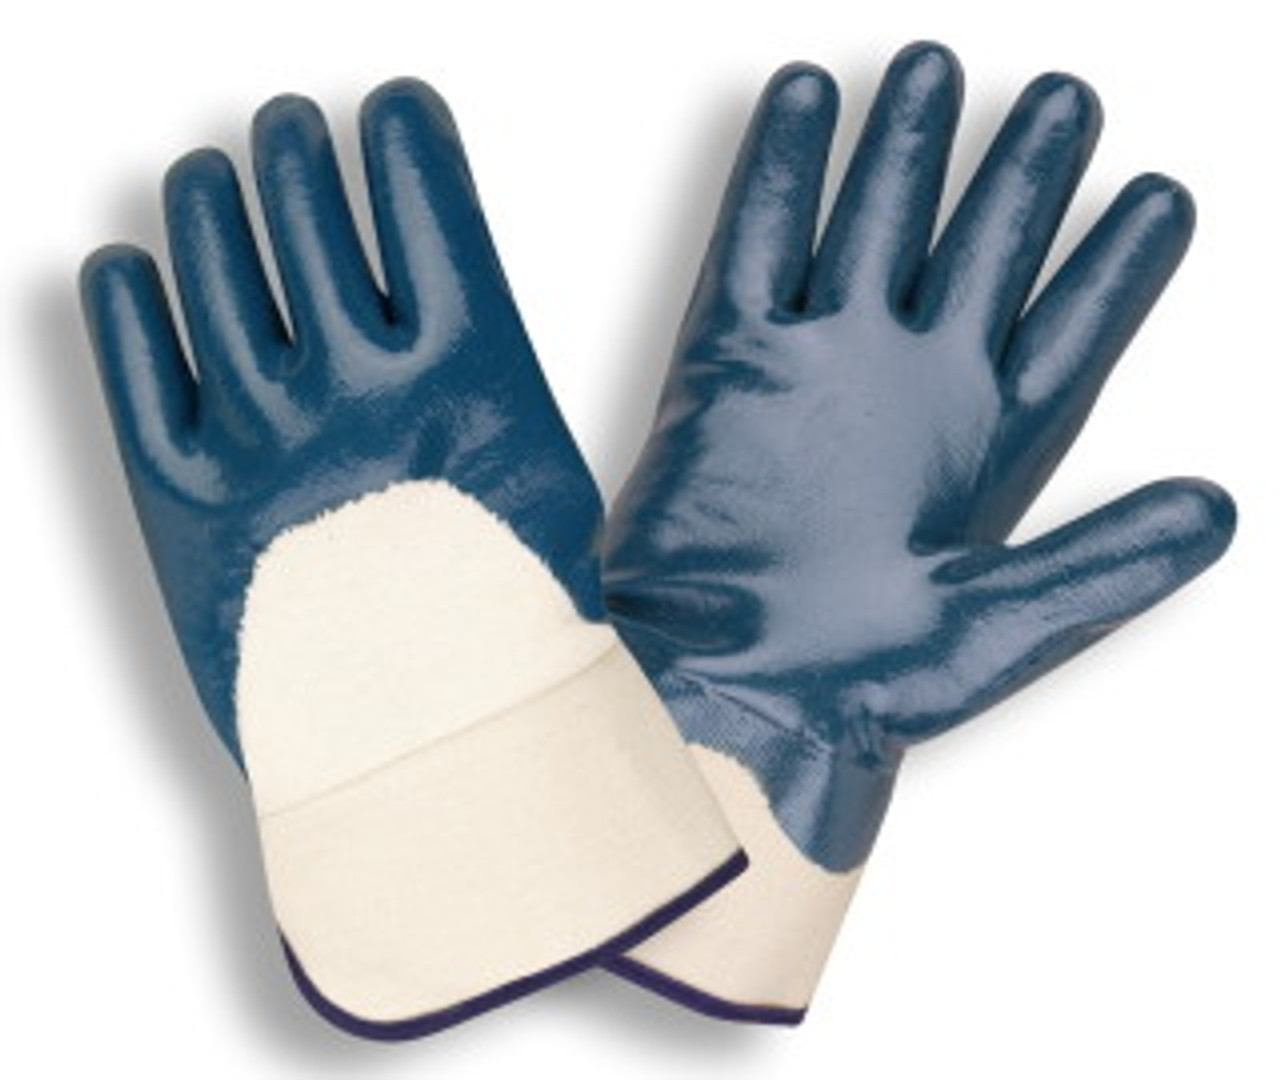 6850: Jersey Lined/Smooth/Knit Wrist Nitrile Gloves - 12 Pack